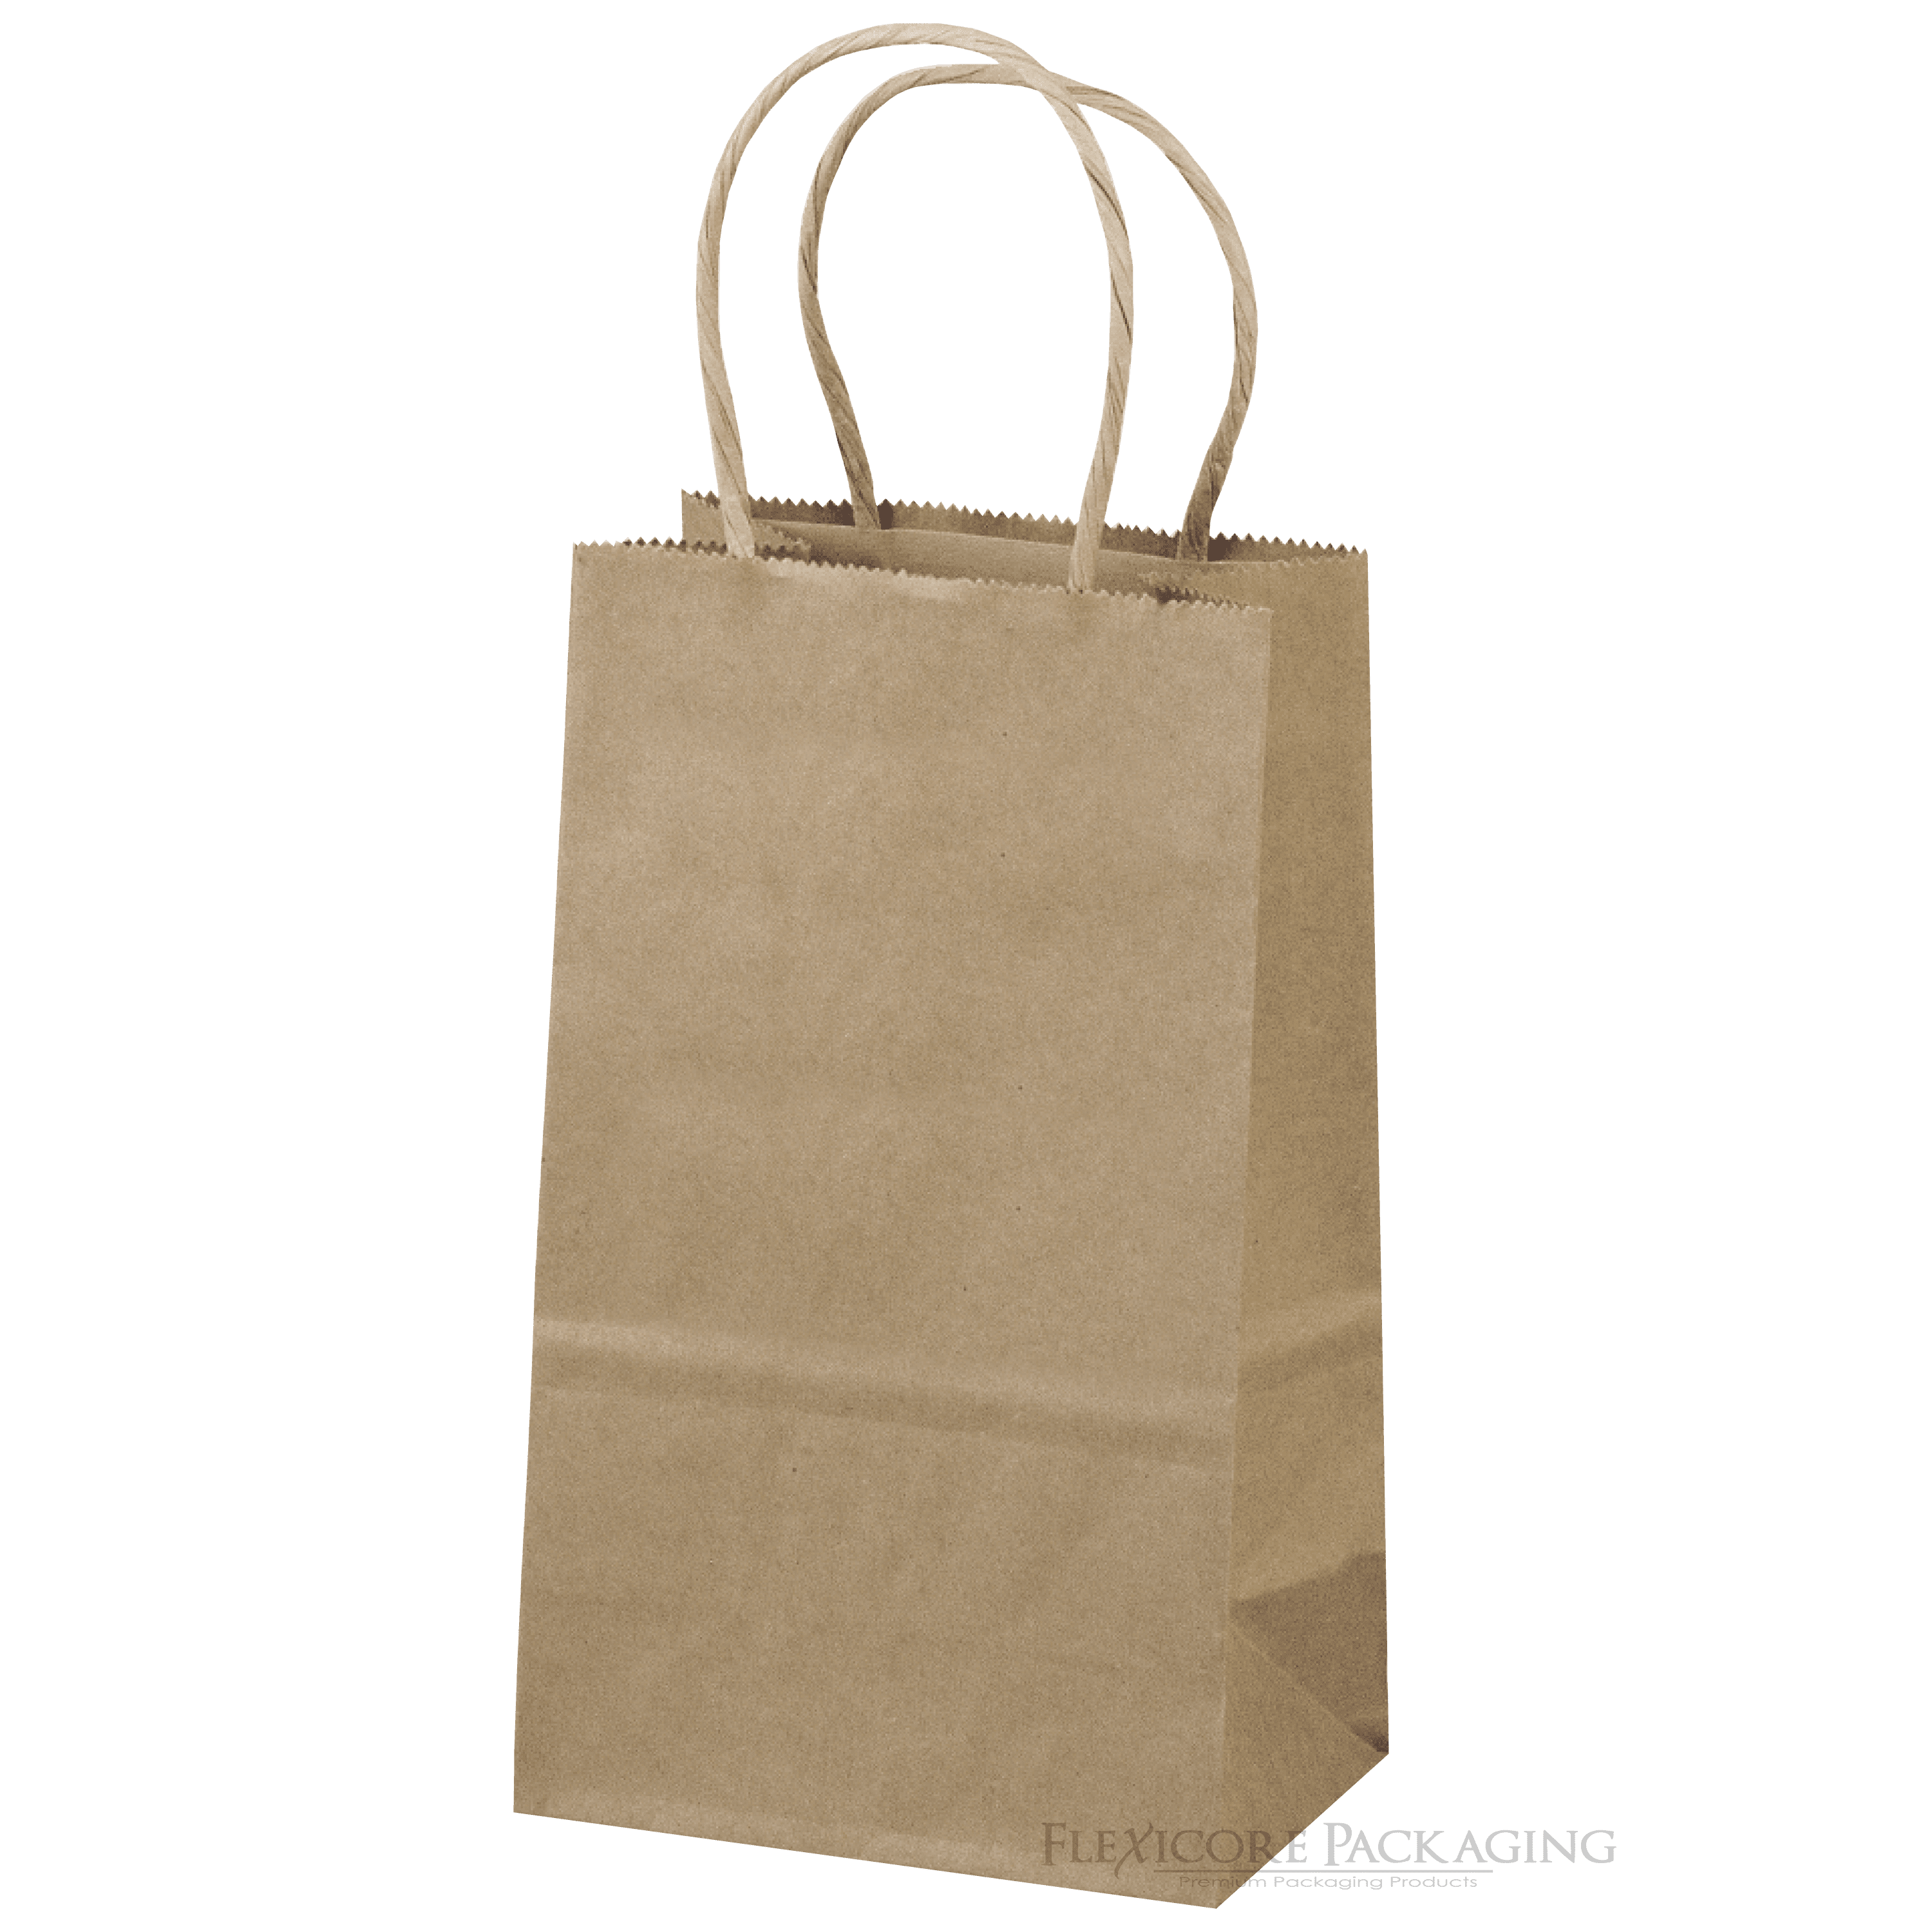 Merchandise Doughnut Sandwich Gift Bags Crafts Jewelry 100 pcs 5 X 7 Brown Kraft Paper Bags for Candy Party Favors Cookies 